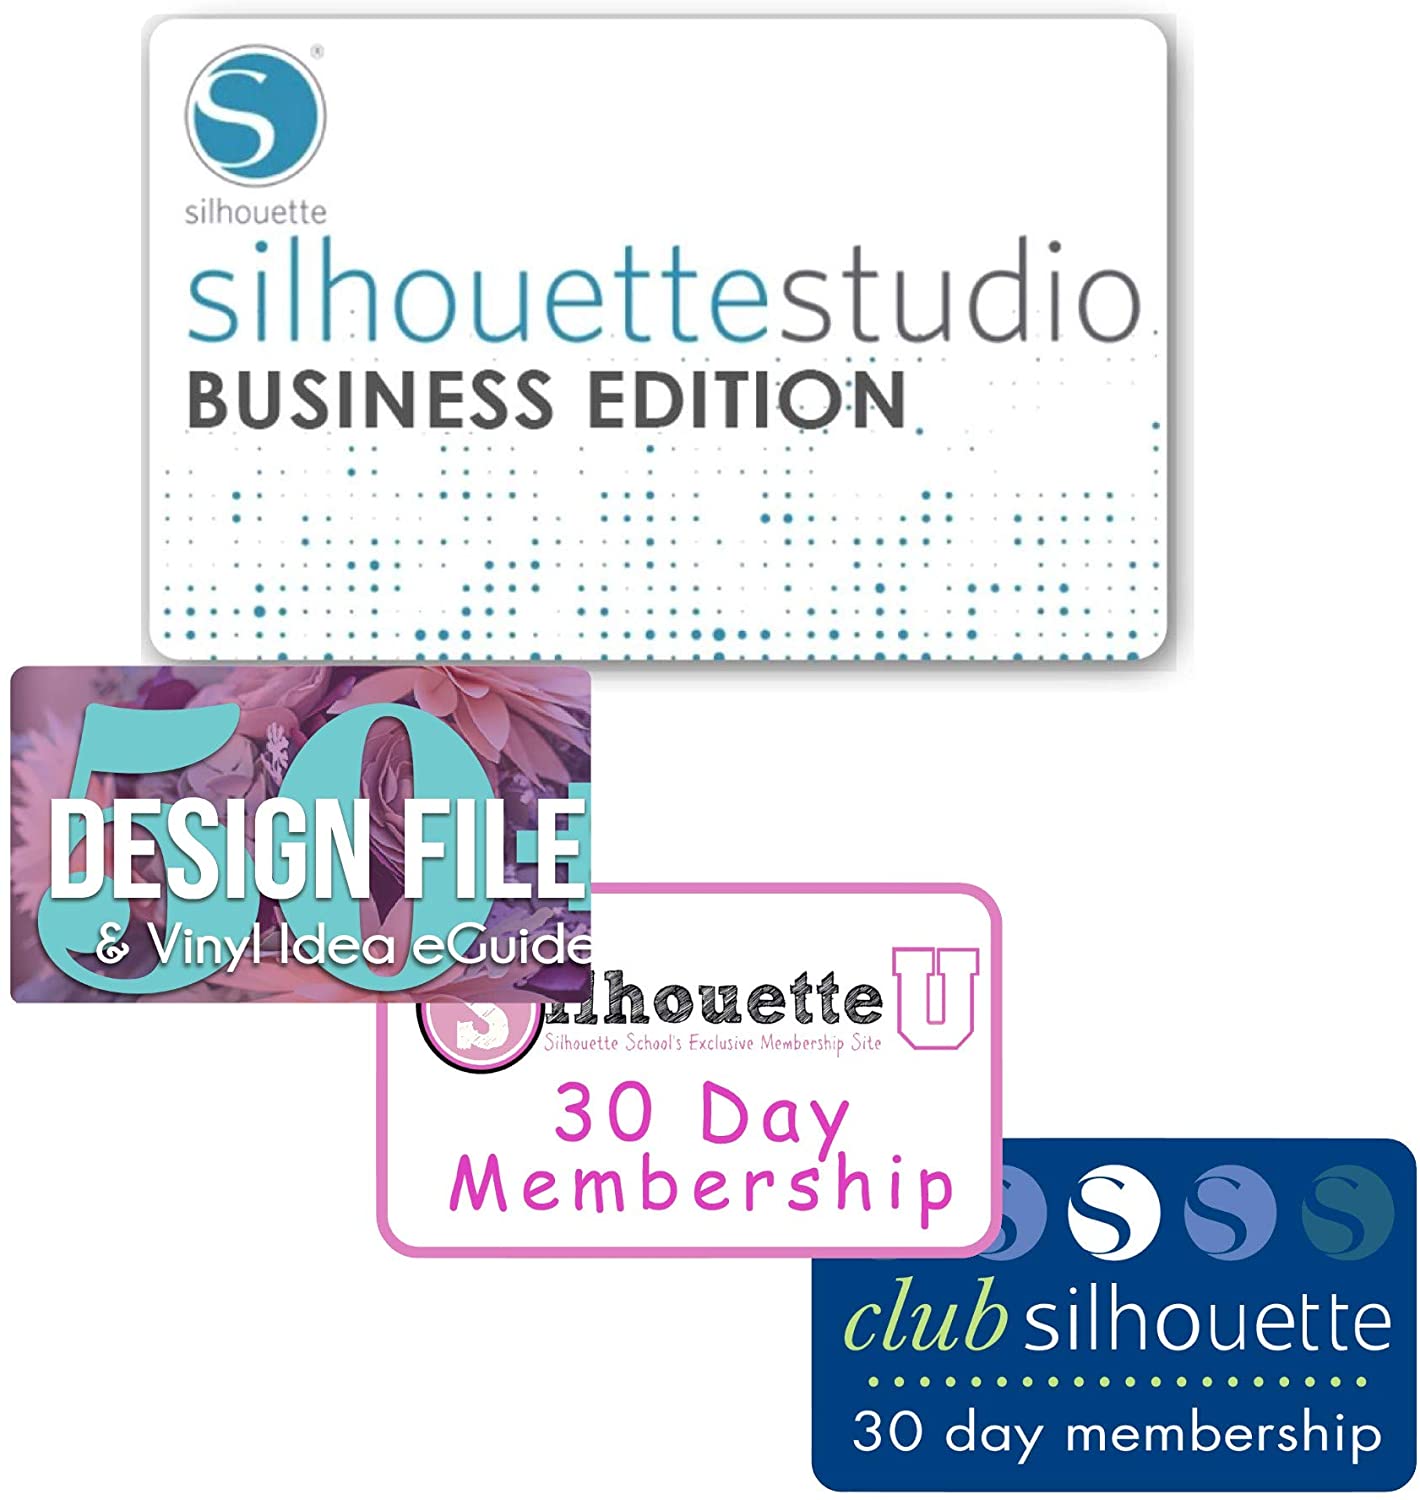 how much is silhouette business edition